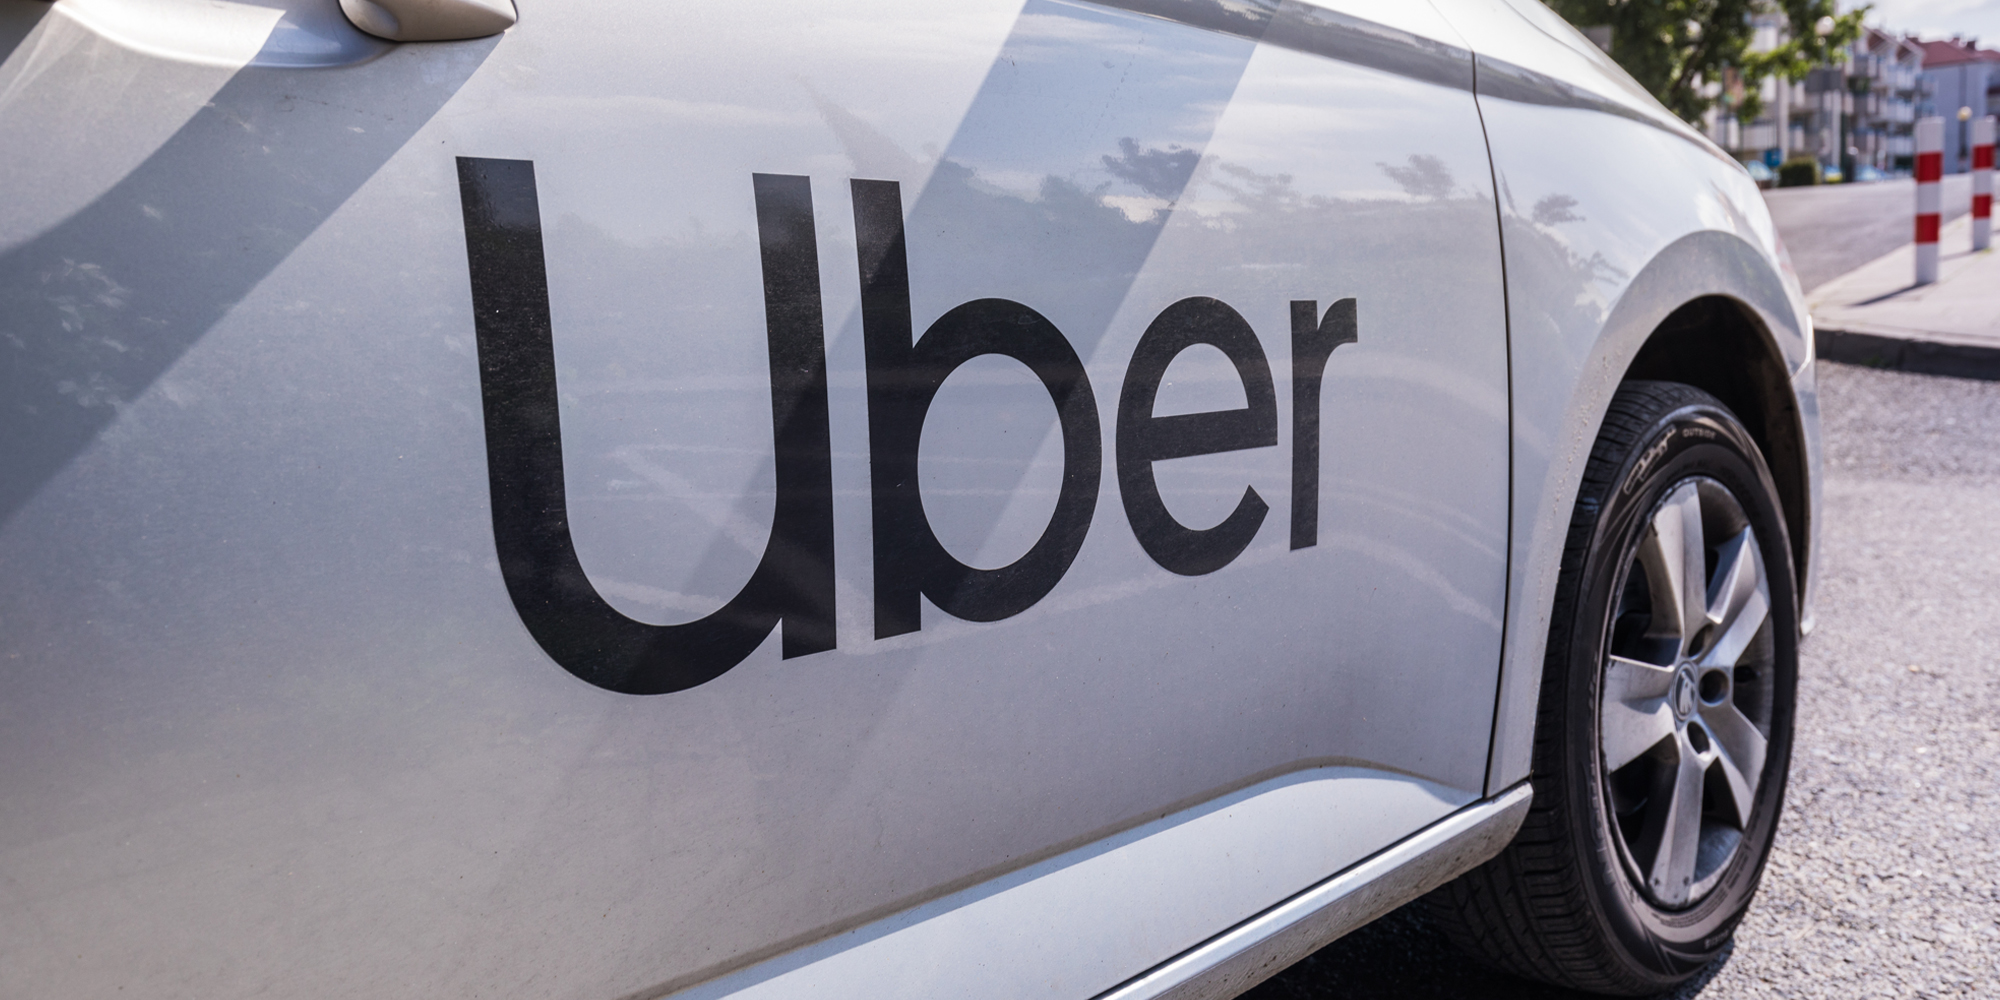 Passenger Says Uber Driver Locked the Doors, Asked to Touch image photo